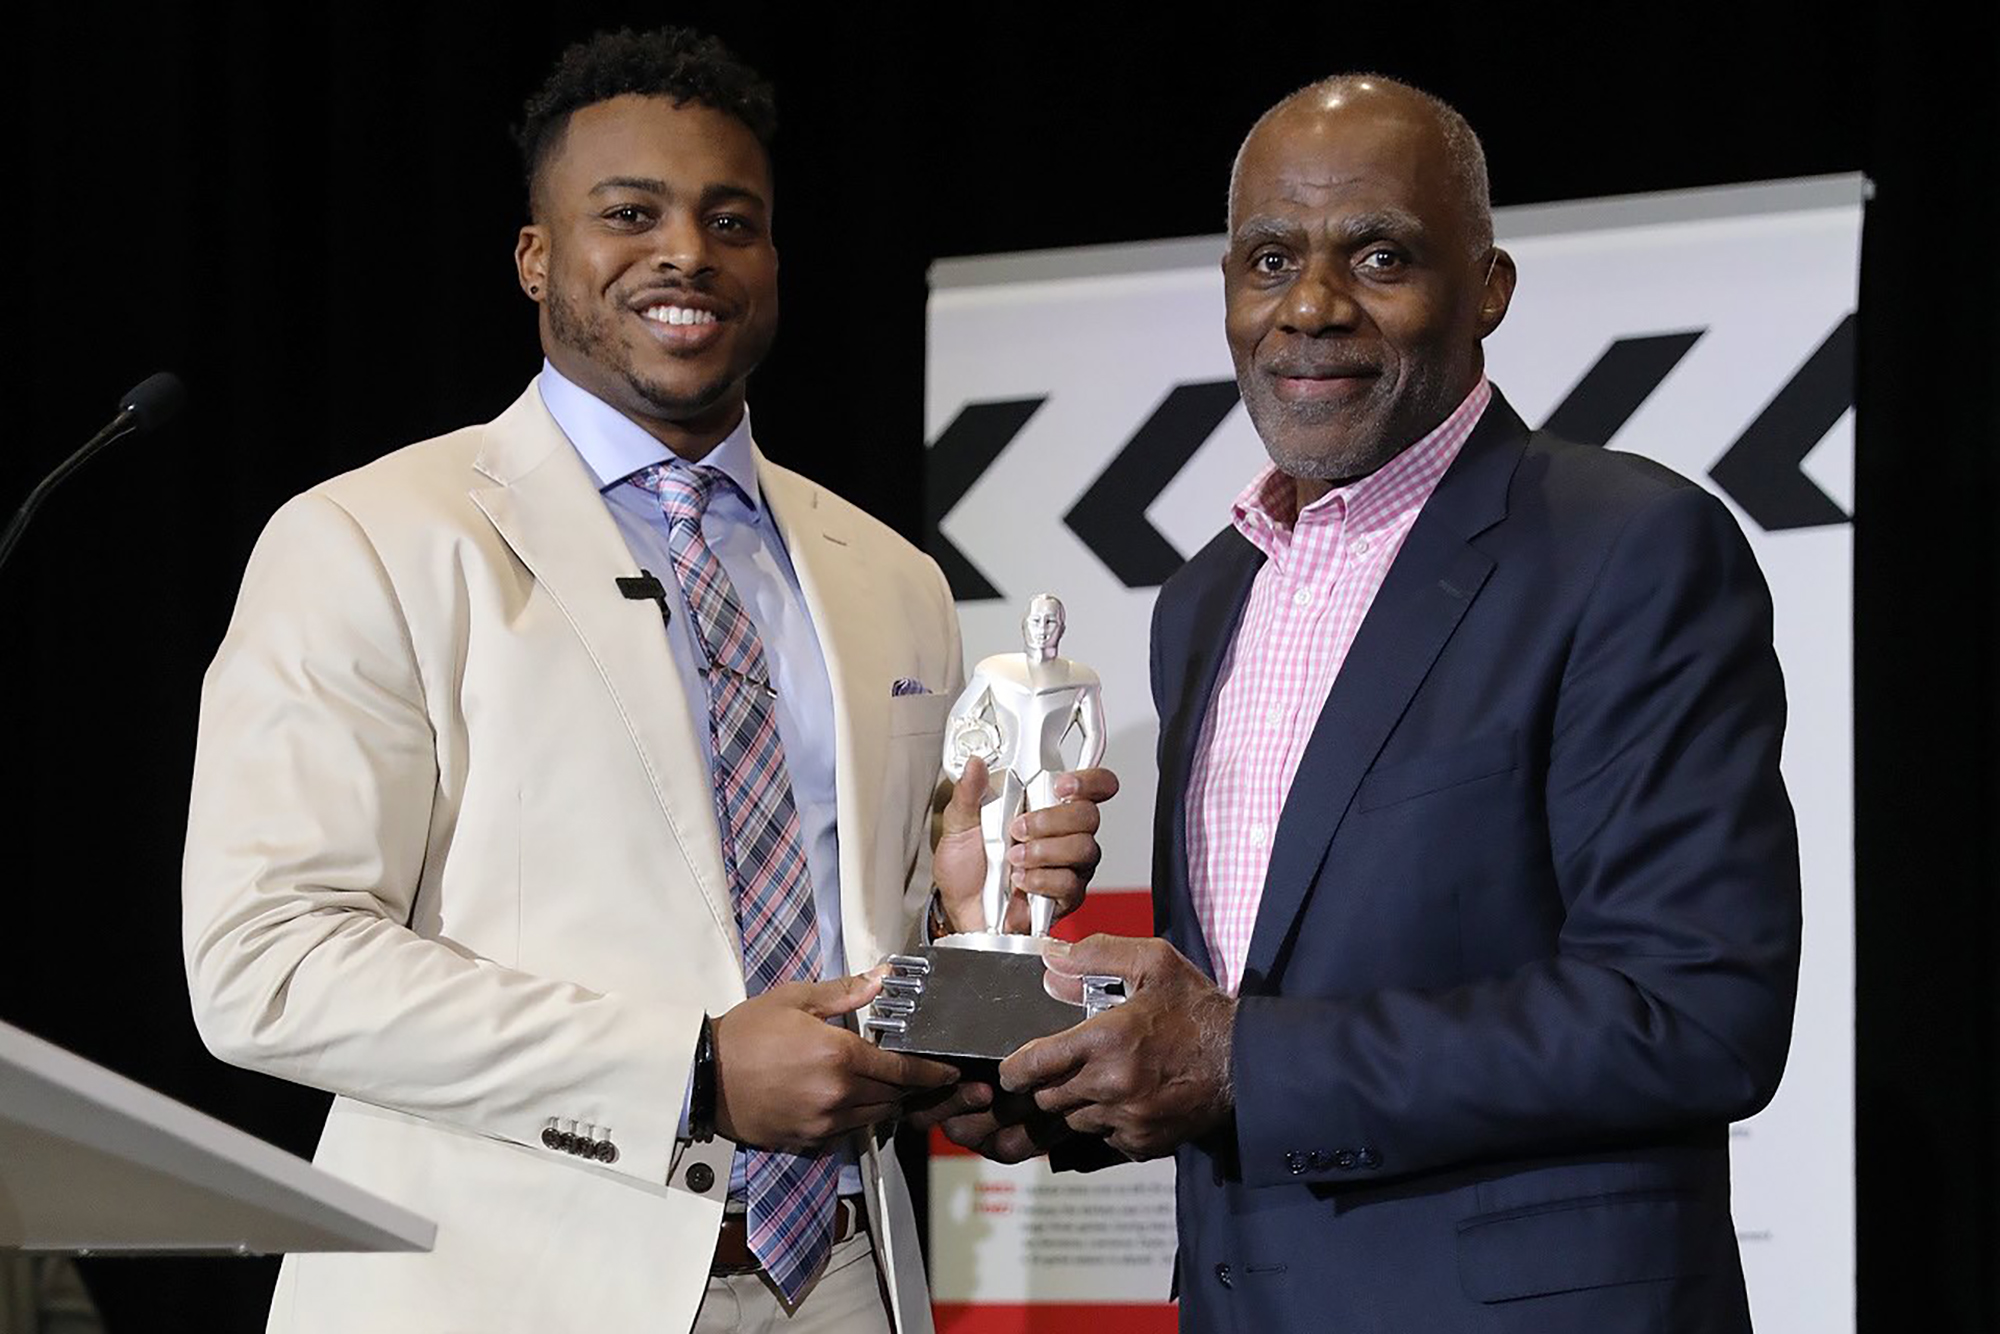 Brandon Copeland and Alan Page hold the NFLPA's Alan Page Community Service Award on stage.